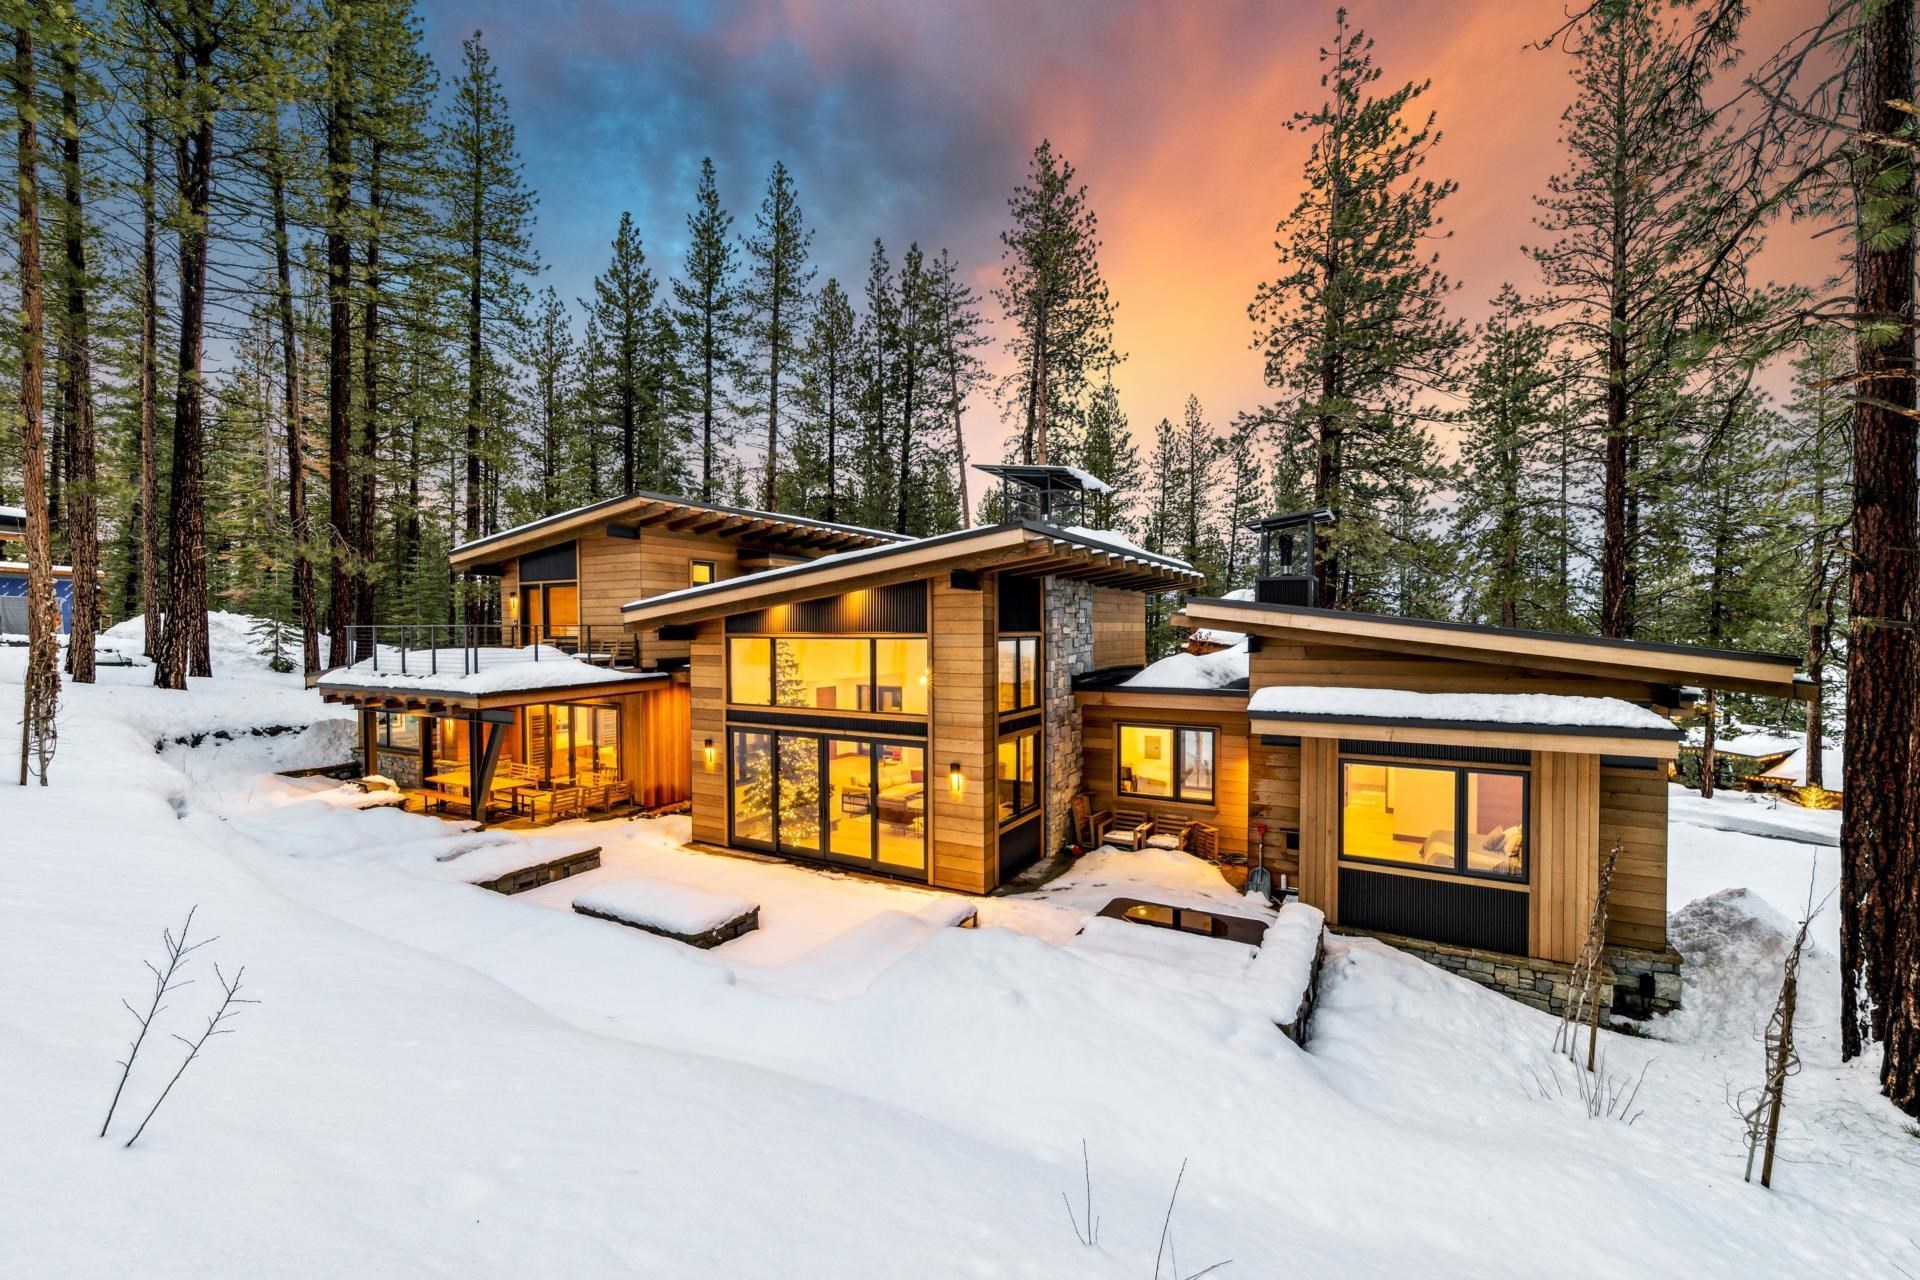 Image for 13300 Snowshoe Thompson Circle, Truckee, CA 96161